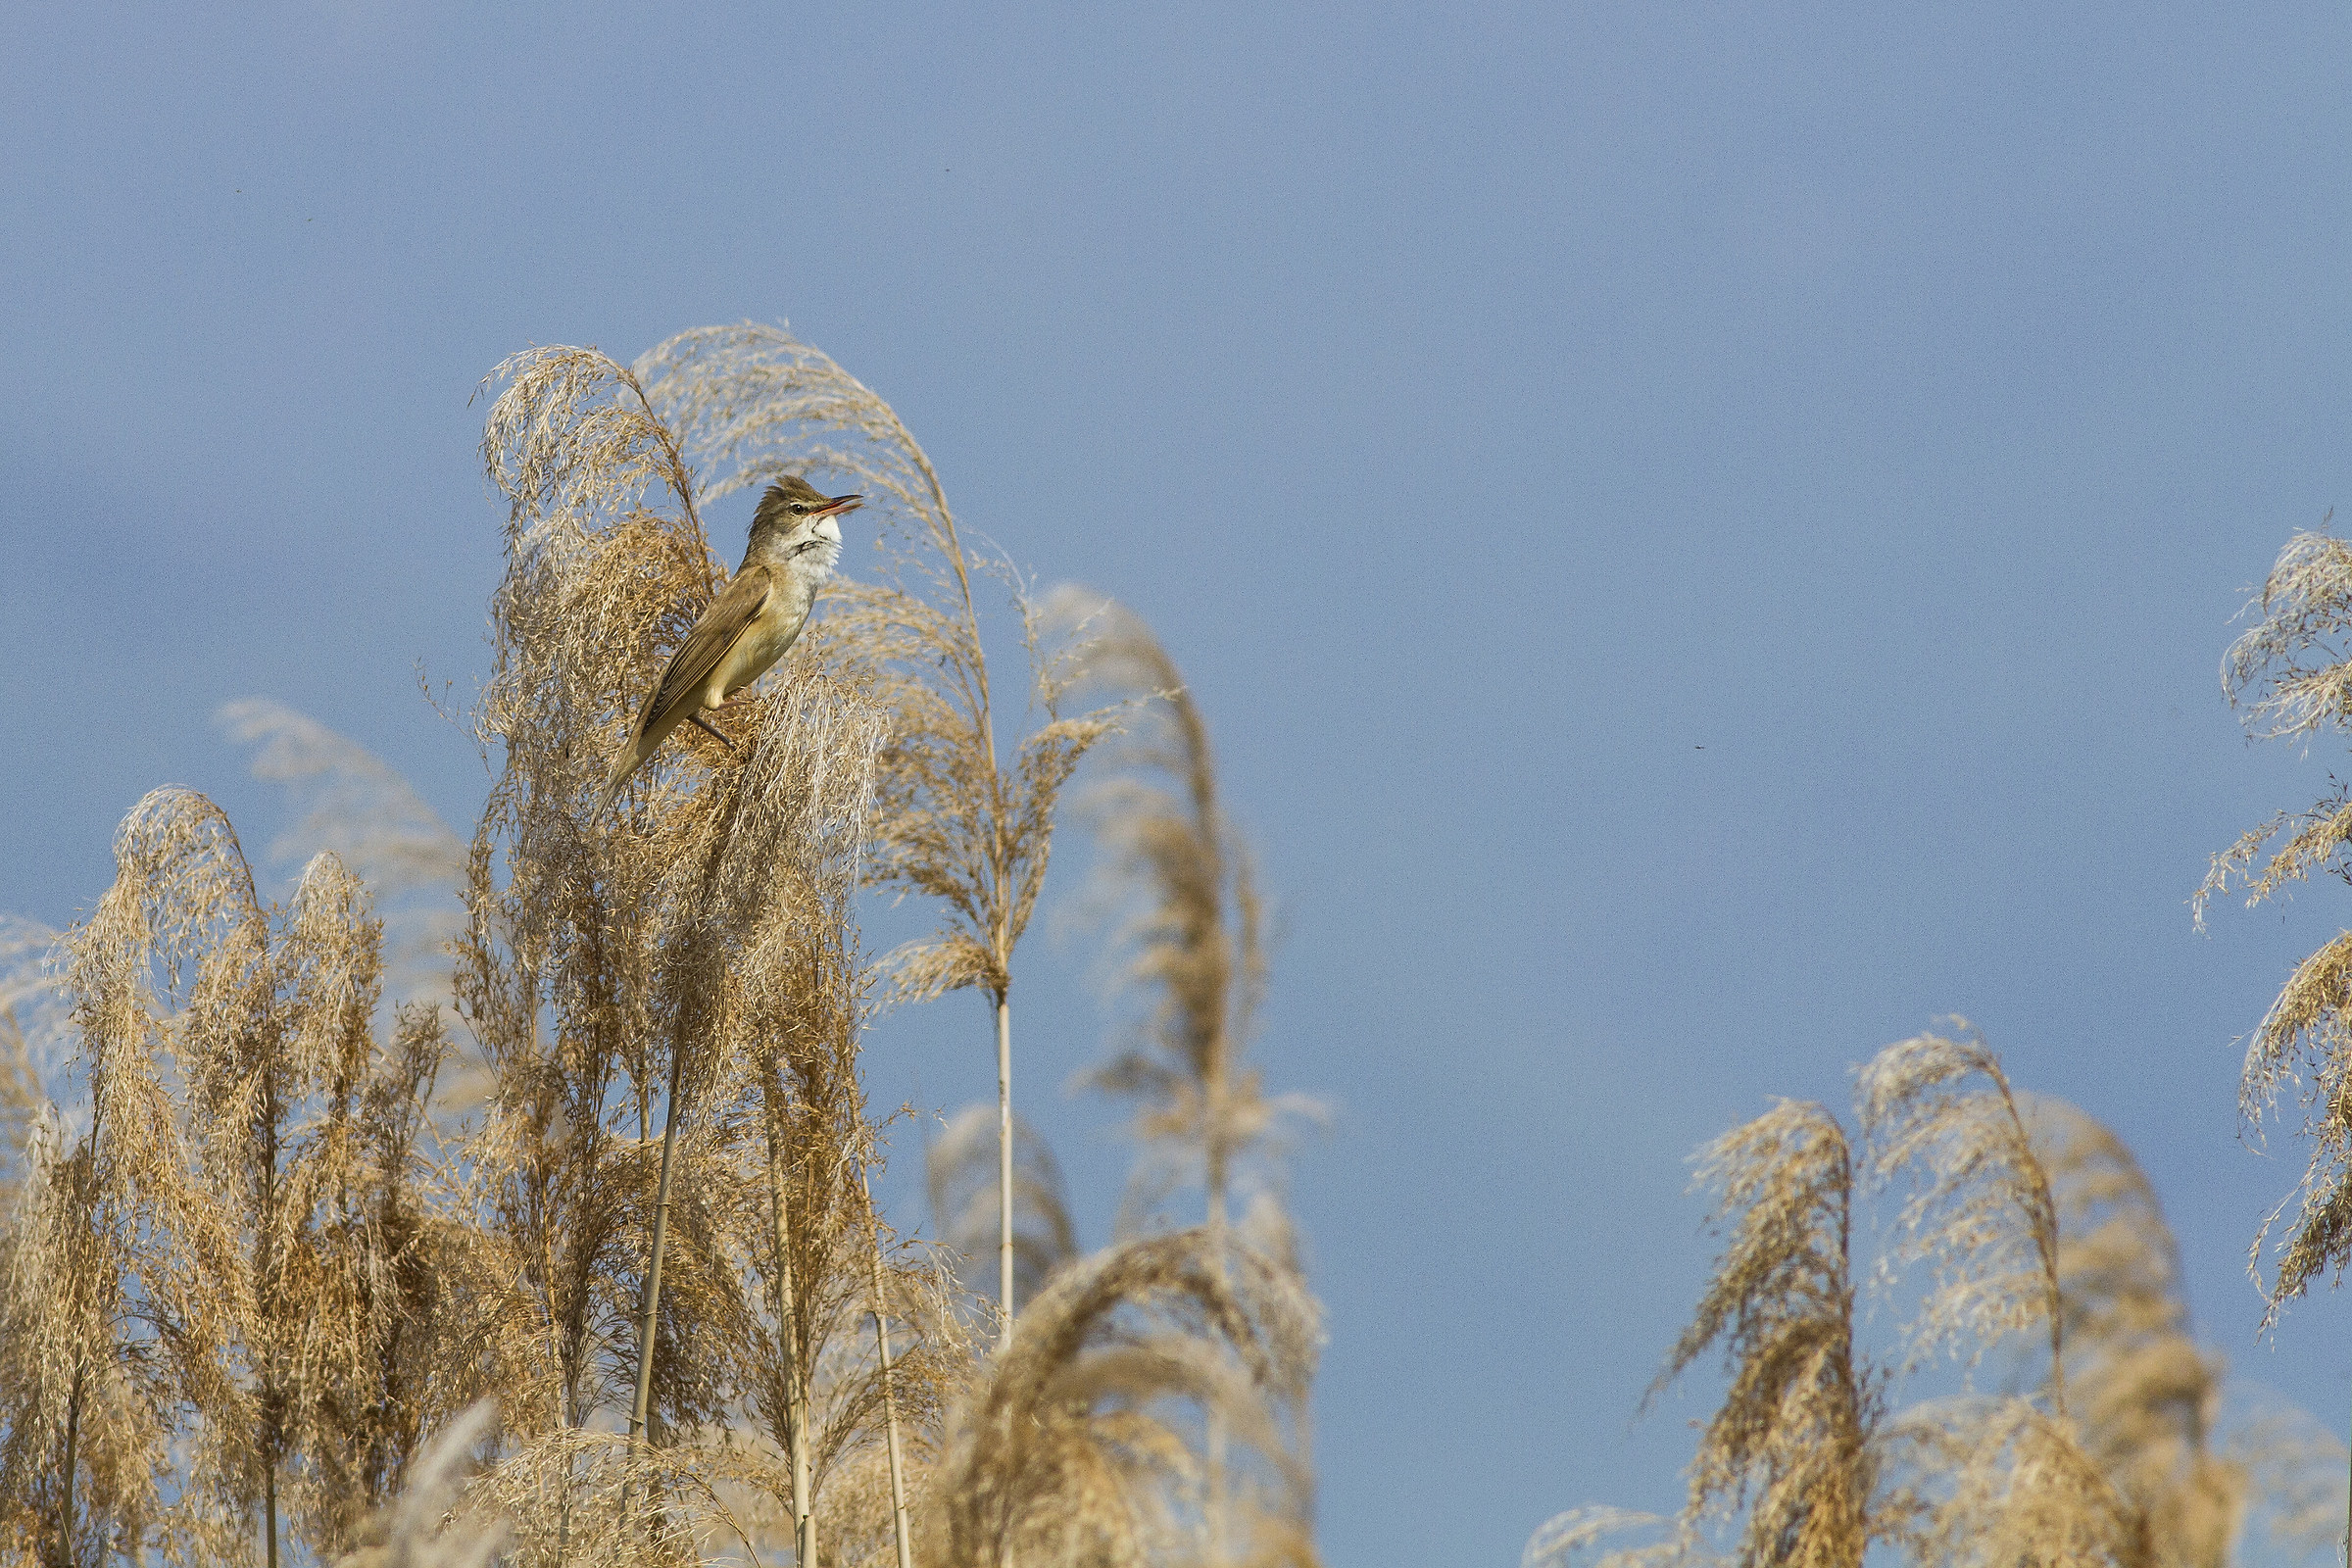 singing in the reeds...